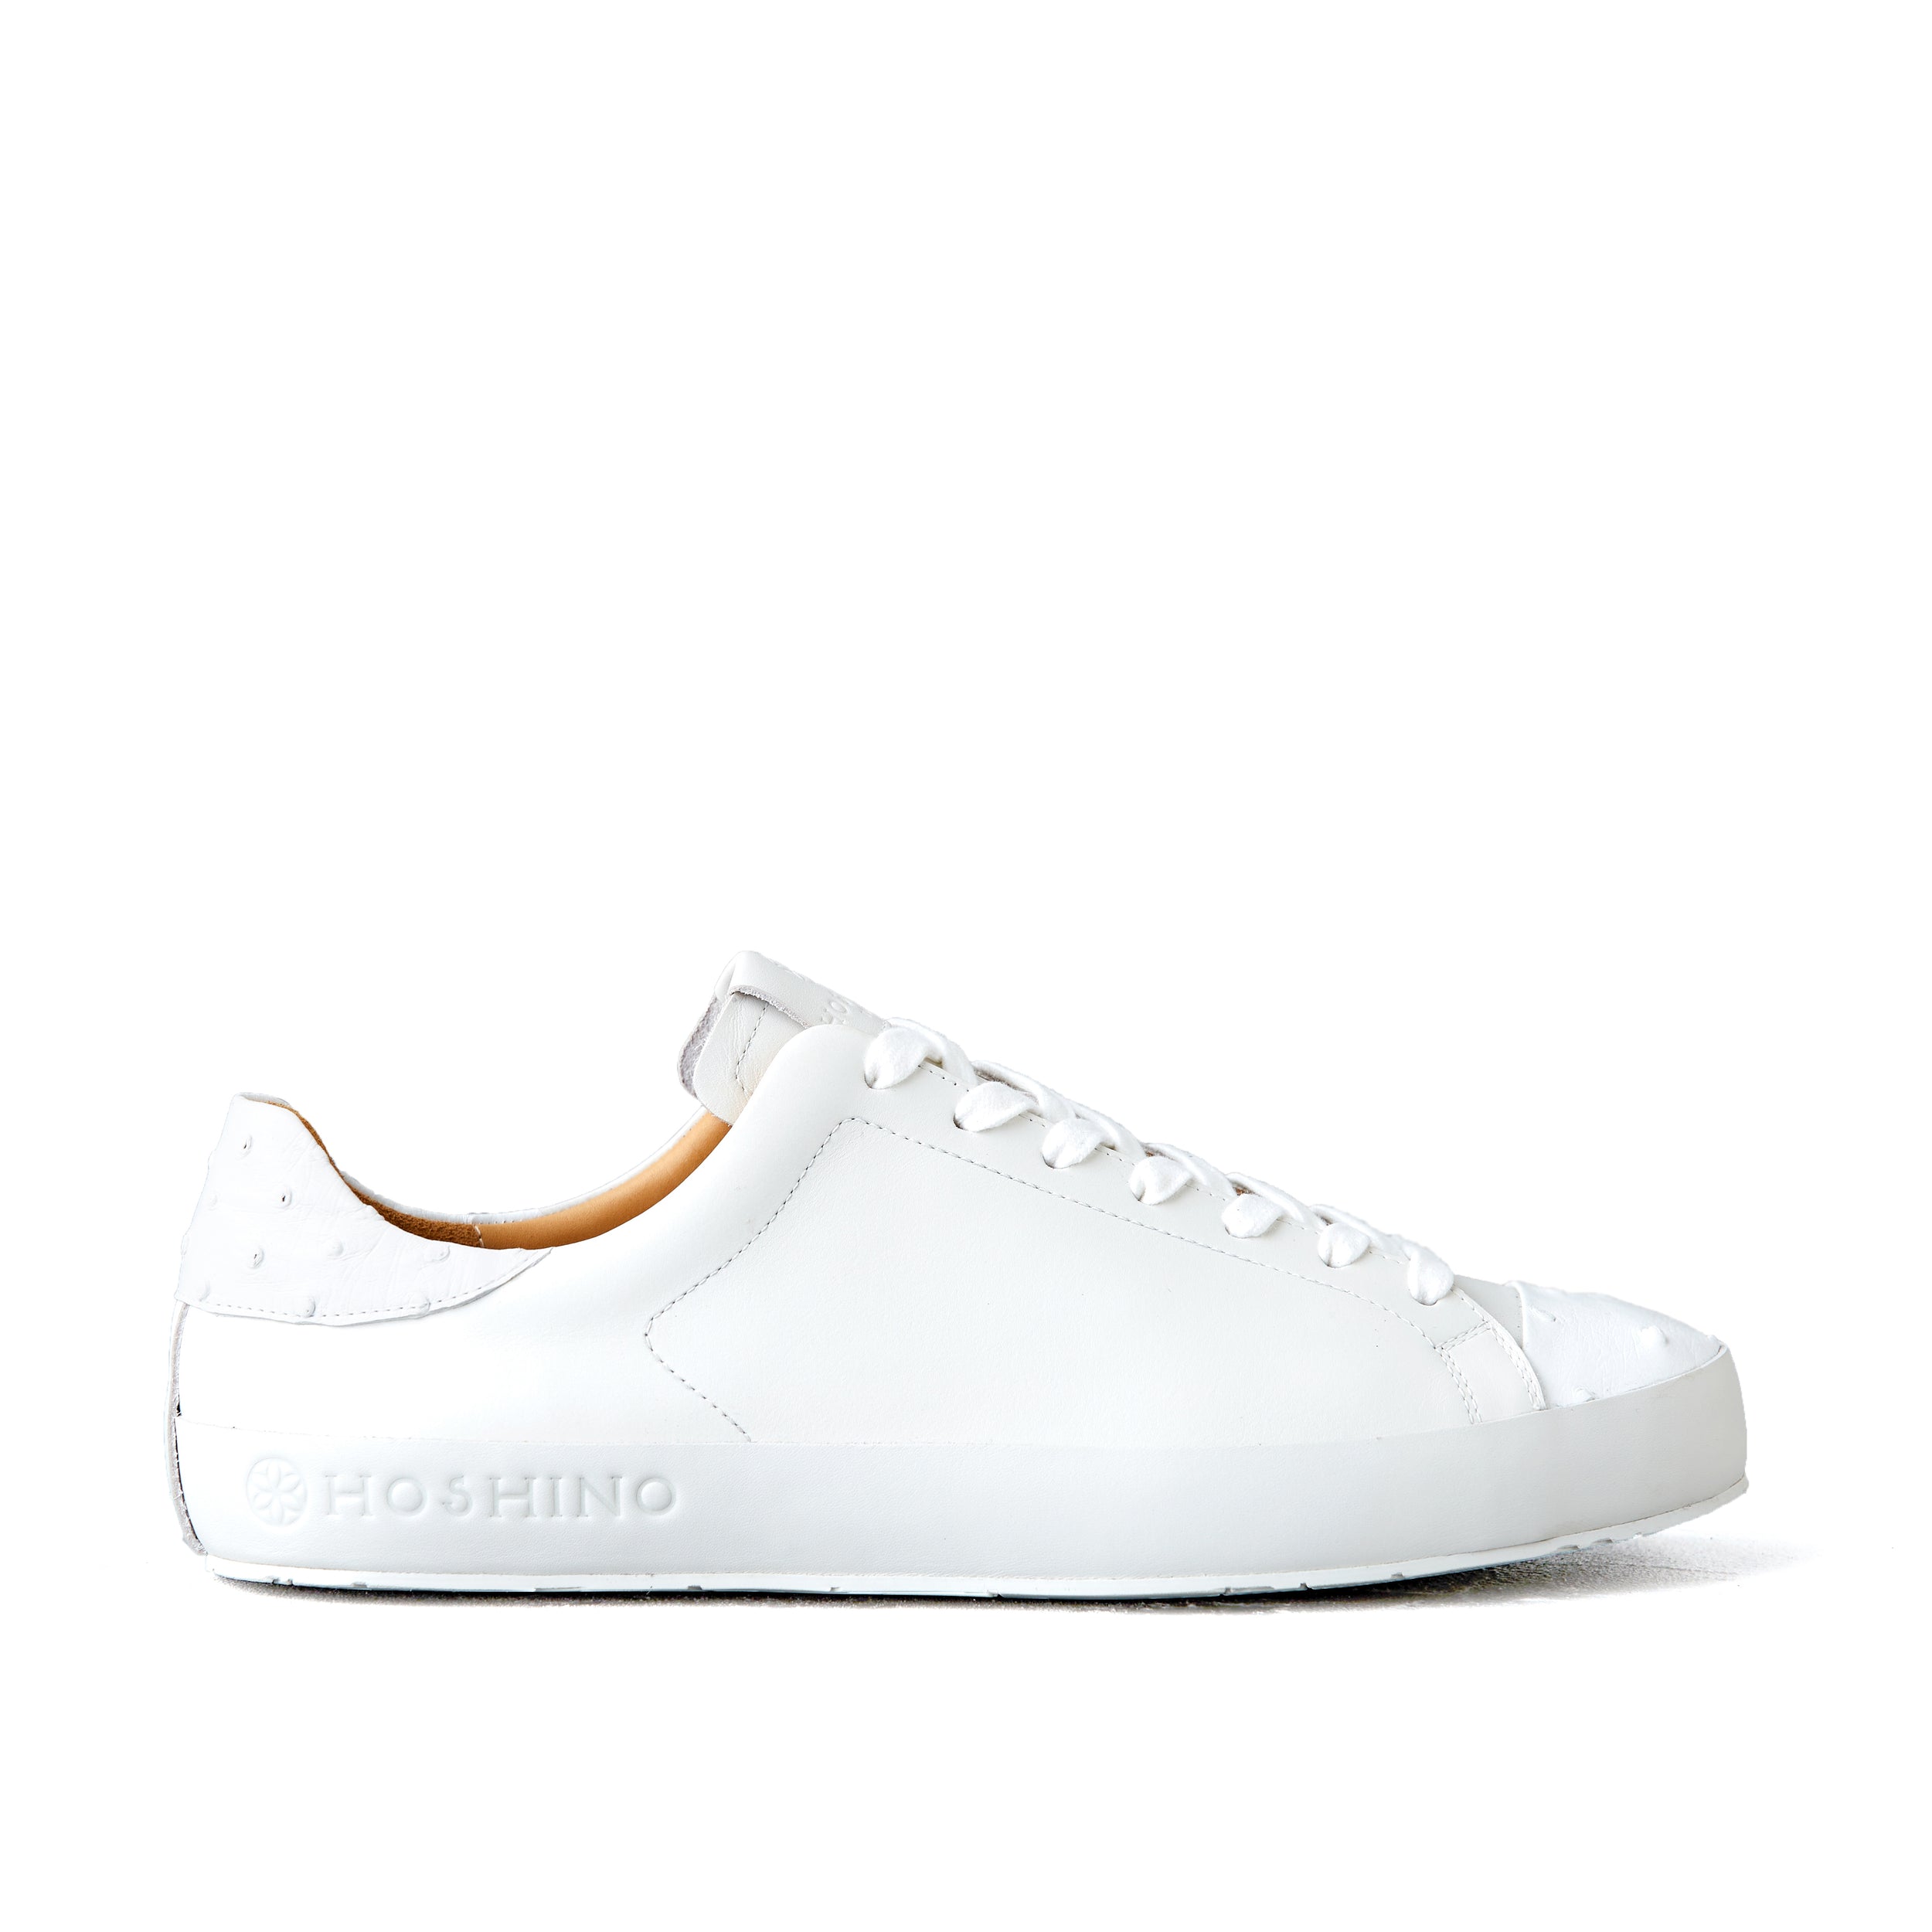 [men's] Liberte - low-top sneakers - combination toe white on white ostrich